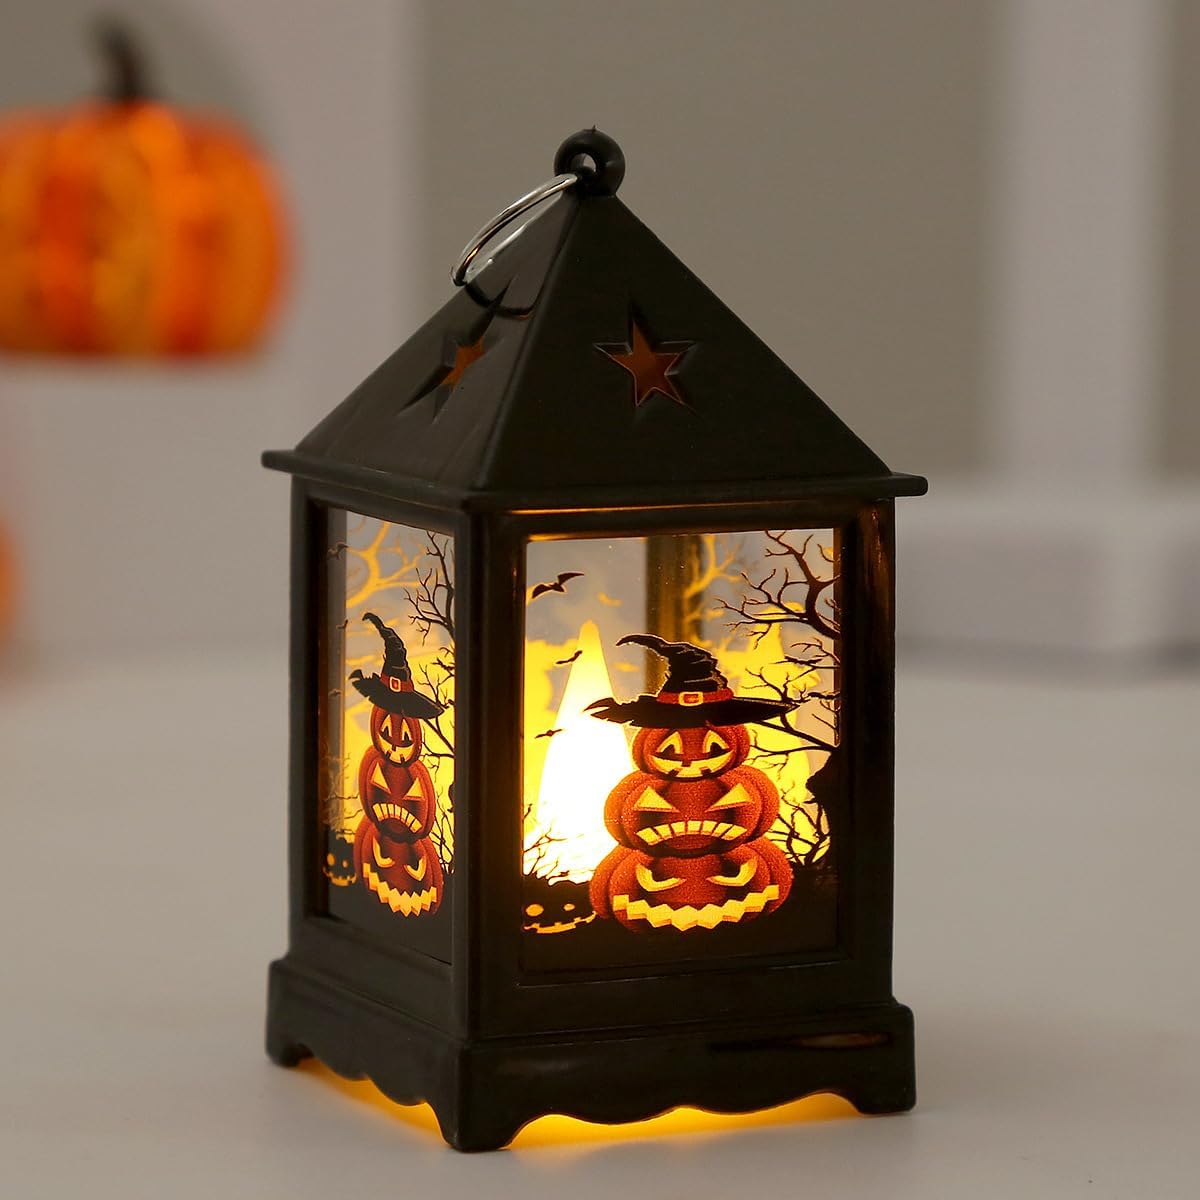 Halloween Candle Night Lights Atmosphere LED Flameless Lamp Good-Looking Portable Lanterns Decoration Multicolor Home Party Bar Indoor Outdoor (Emitting Color 01)